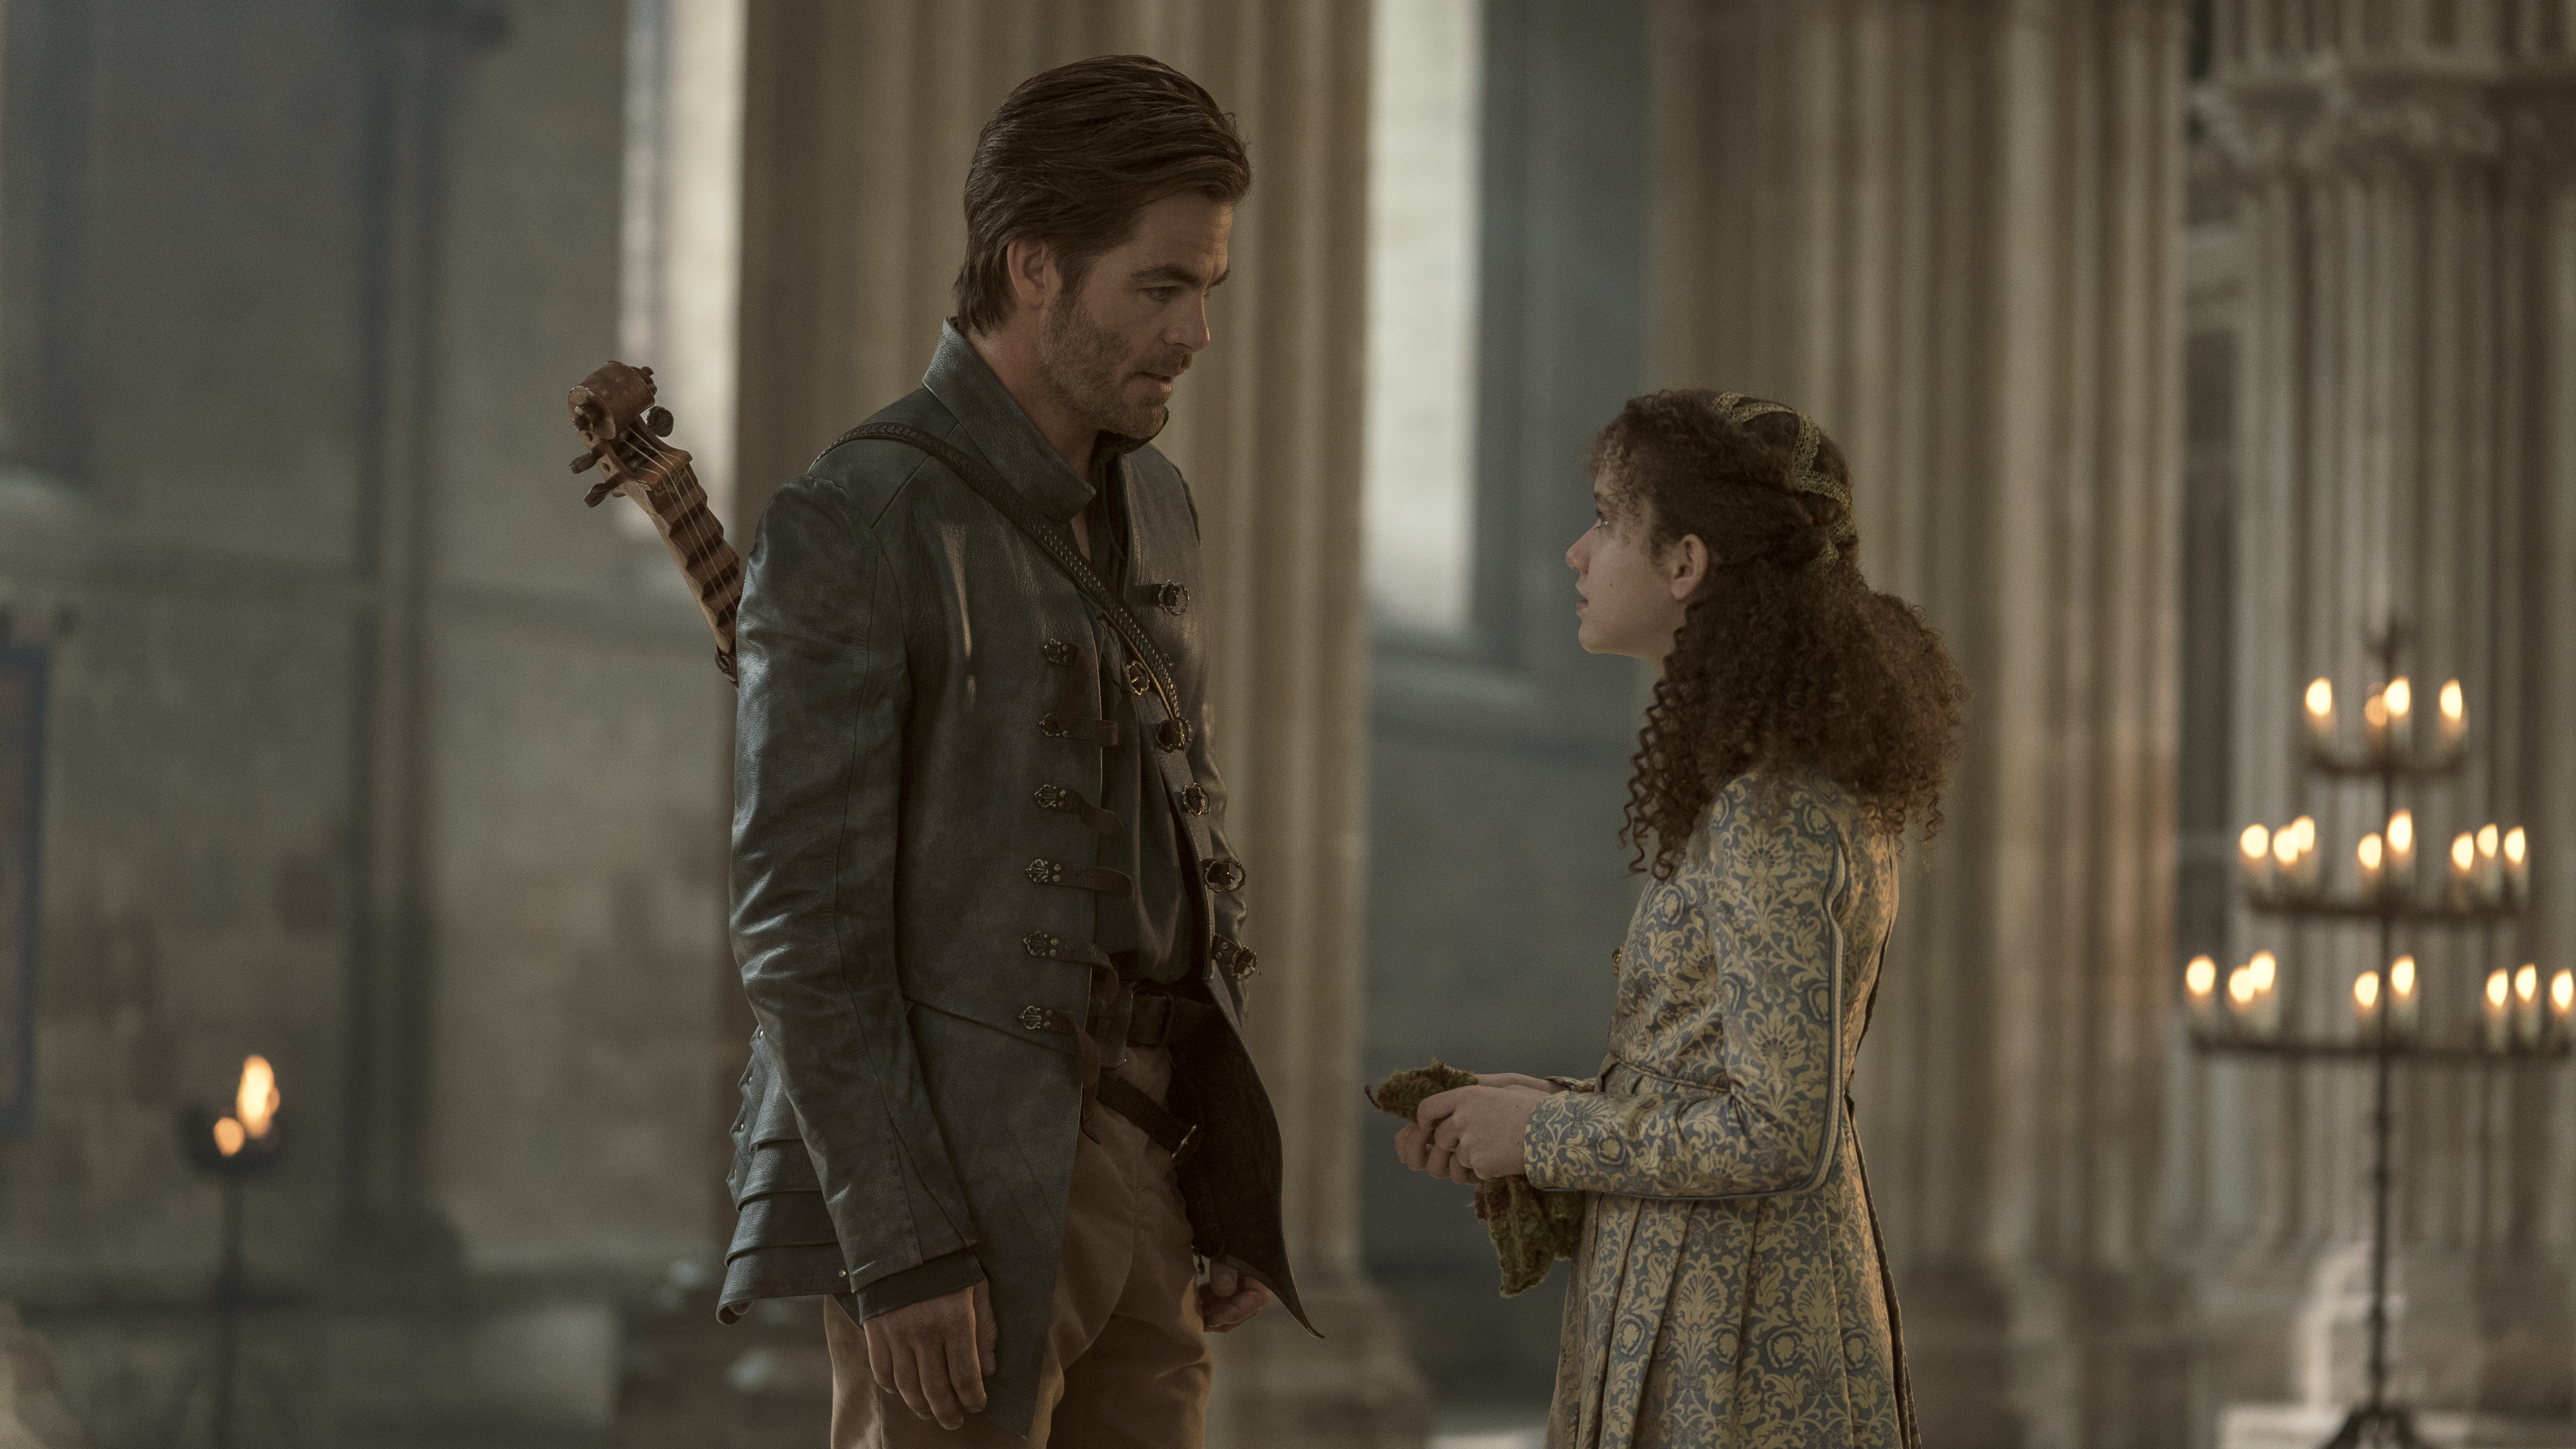 Chris Pine plays Edgin and Chloe Coleman plays Kira in 'Dungeons & Dragons: Honor Among Thieves'. Image: Paramount Pictures / eOne / Supplied